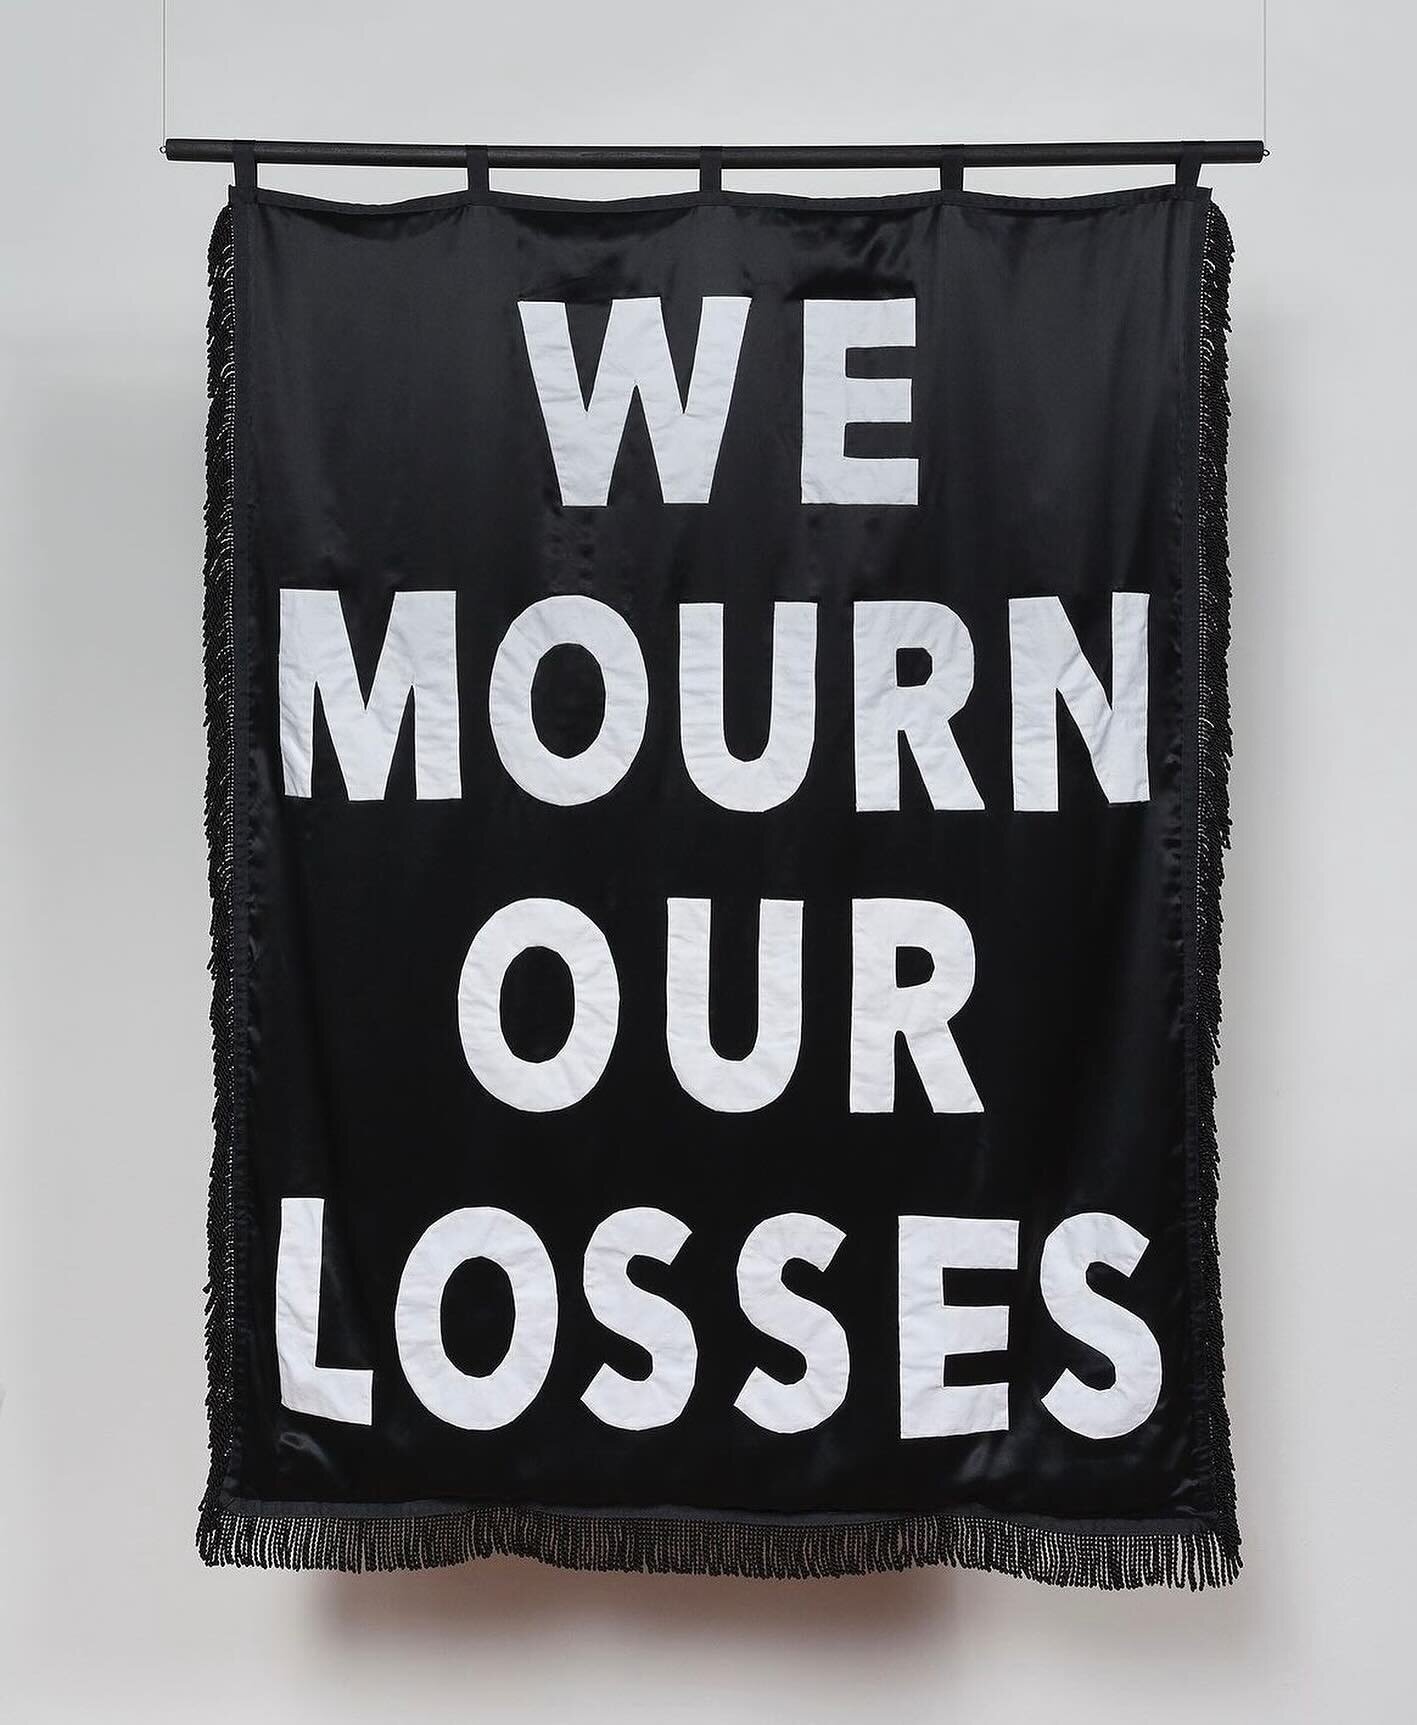 We mourn our losses.

See this banner and more at @workersartsandheritage 

🖼️ @l_vinebaum 

#grief #griefjourney #griefart #creativegrief